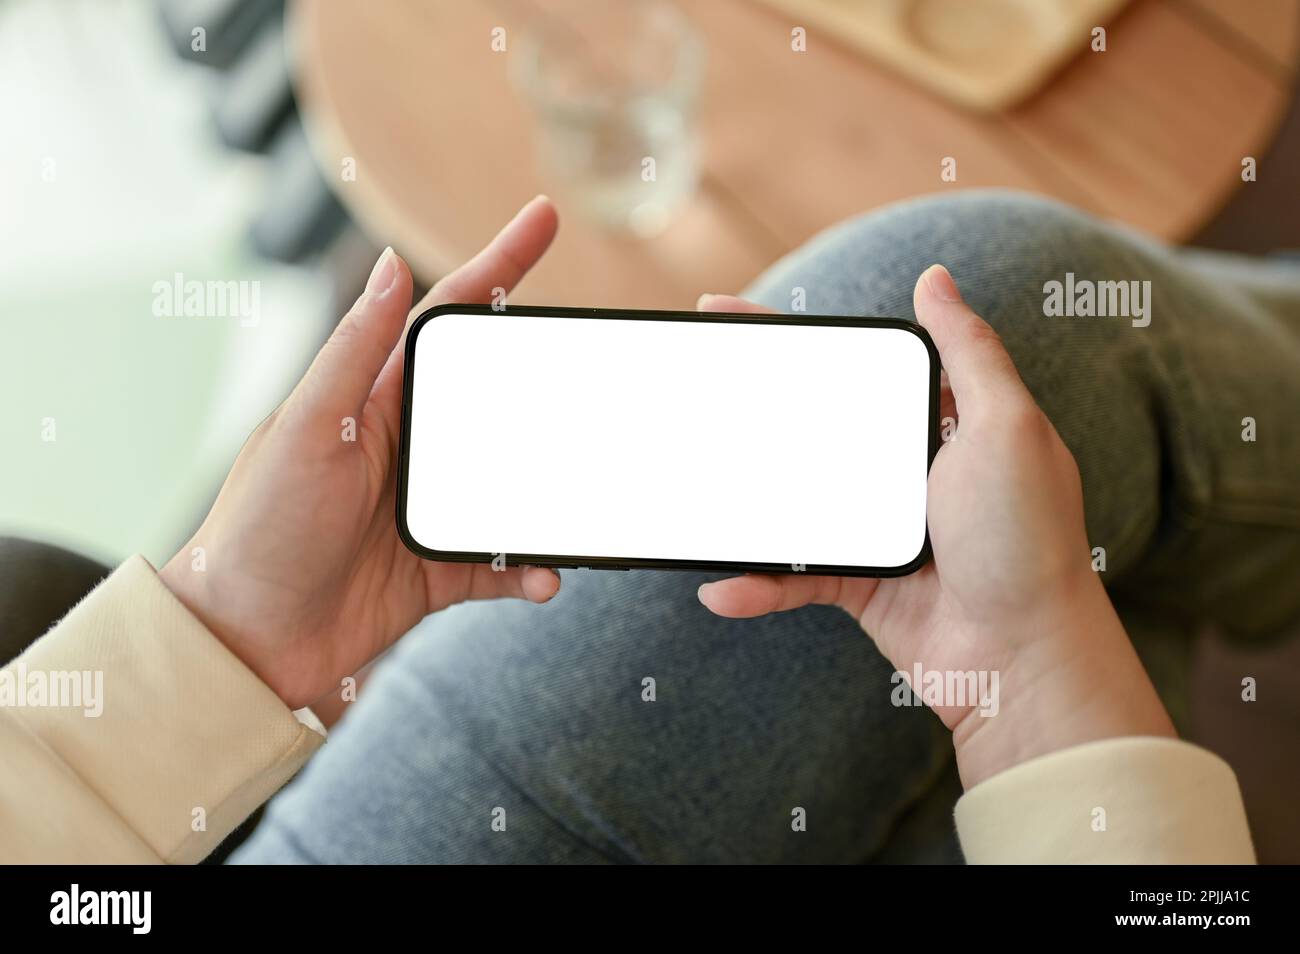 Top view of a female watching something on her phone, holding a smartphone in horizontal position. Stock Photo